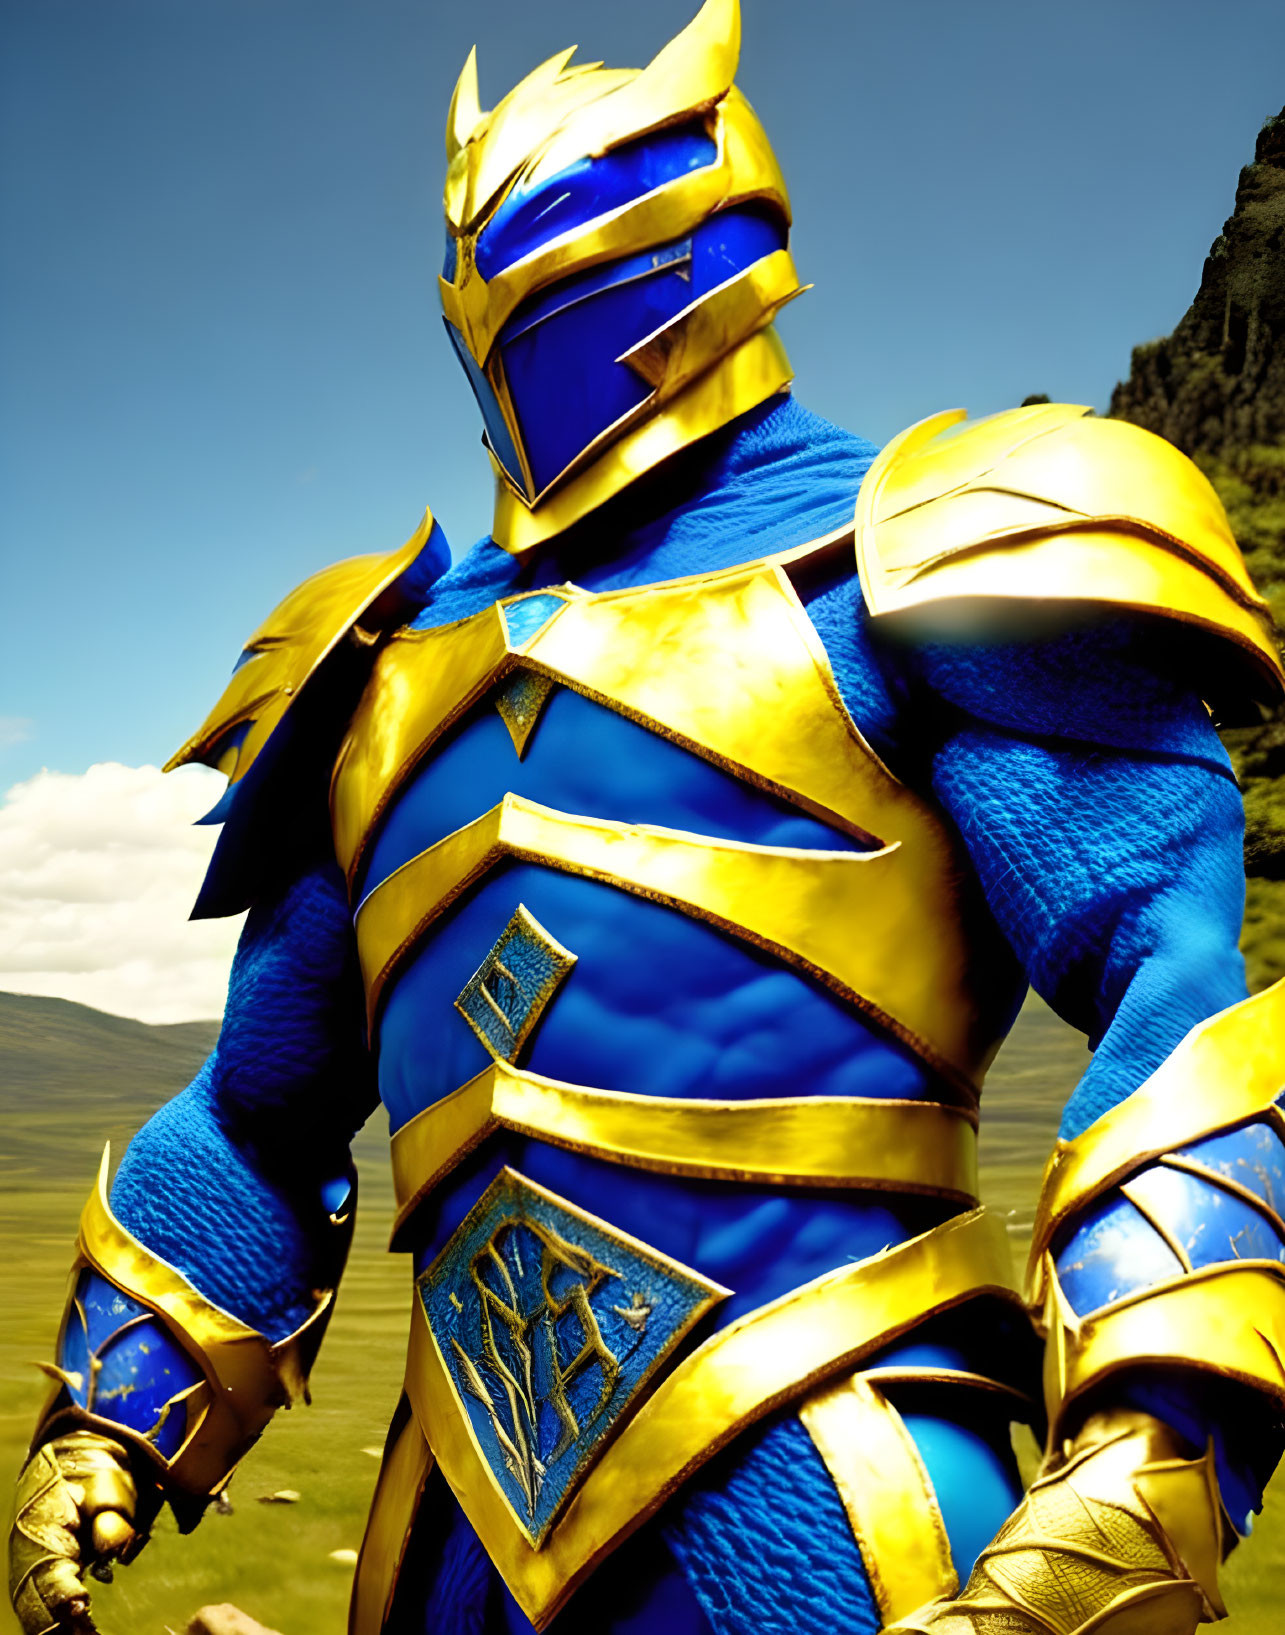 Elaborate Blue and Gold Armor on Heroic Figure